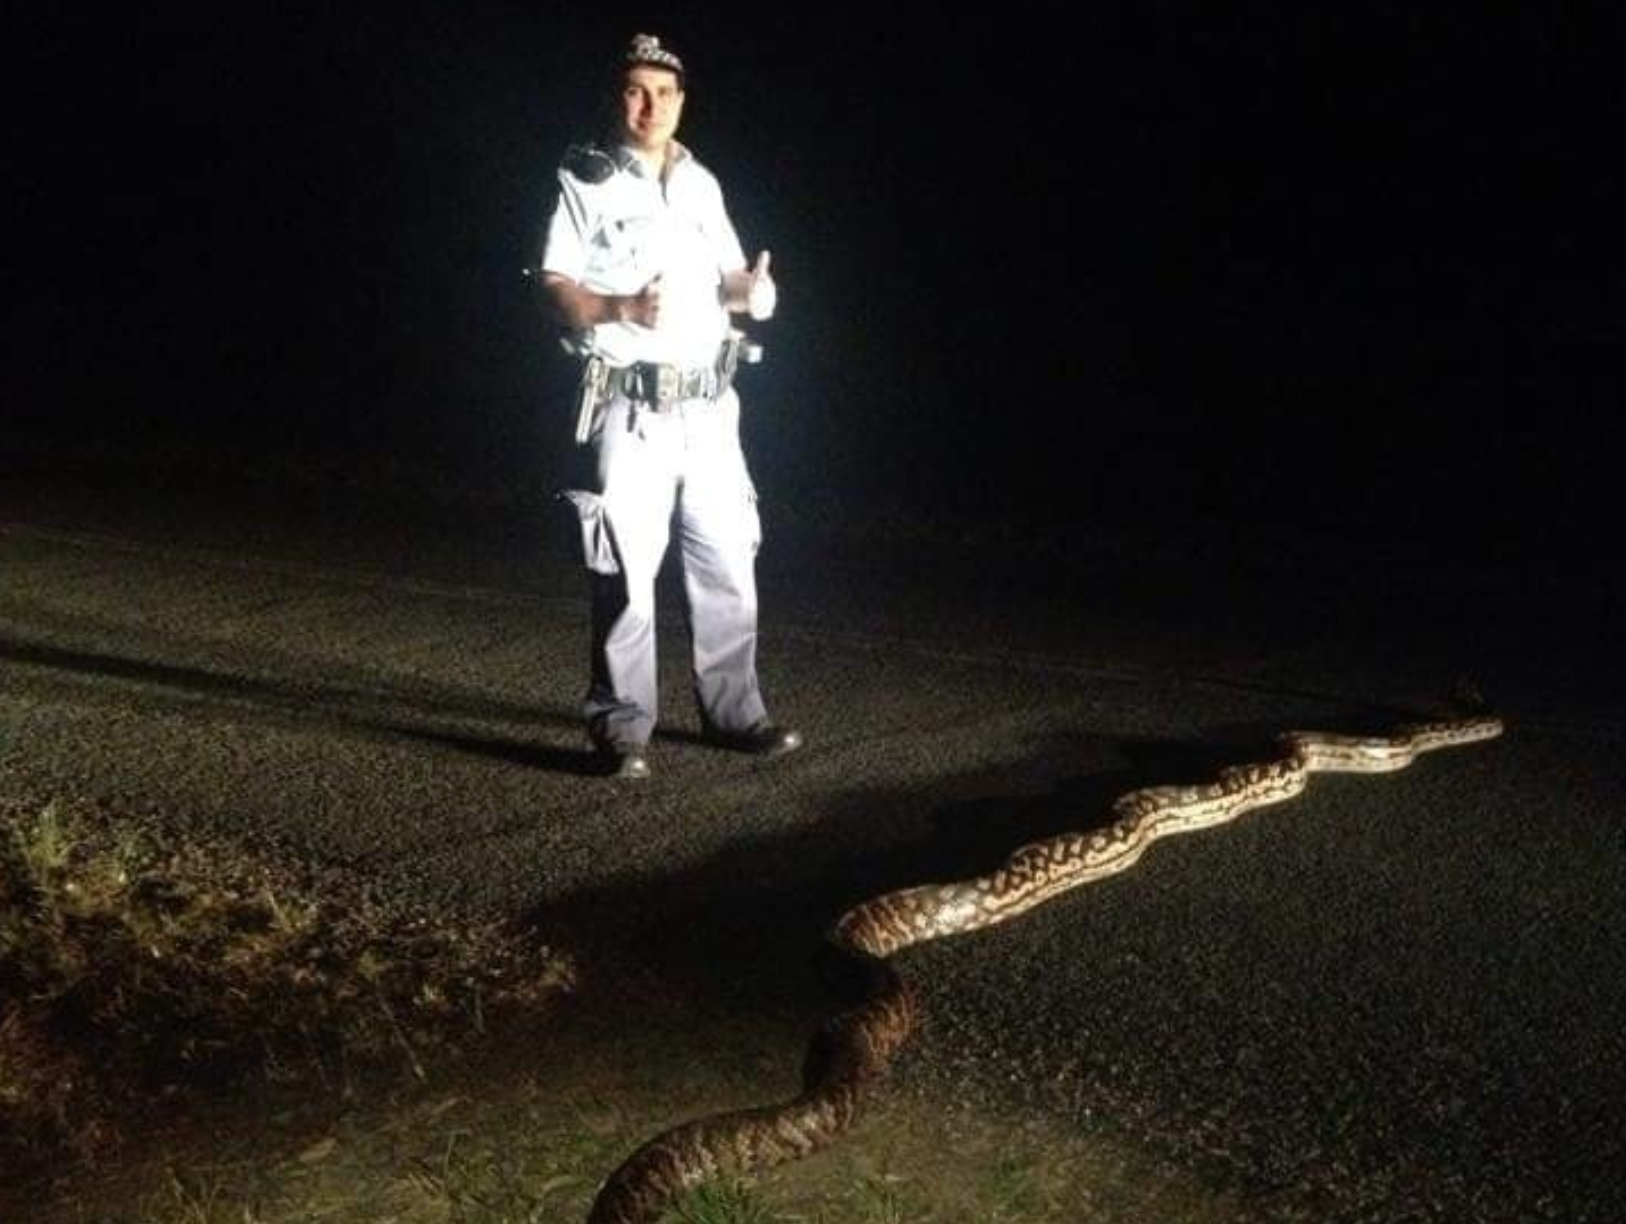 Size of huge python crossing the street shocks internet: ‘I’d move state’